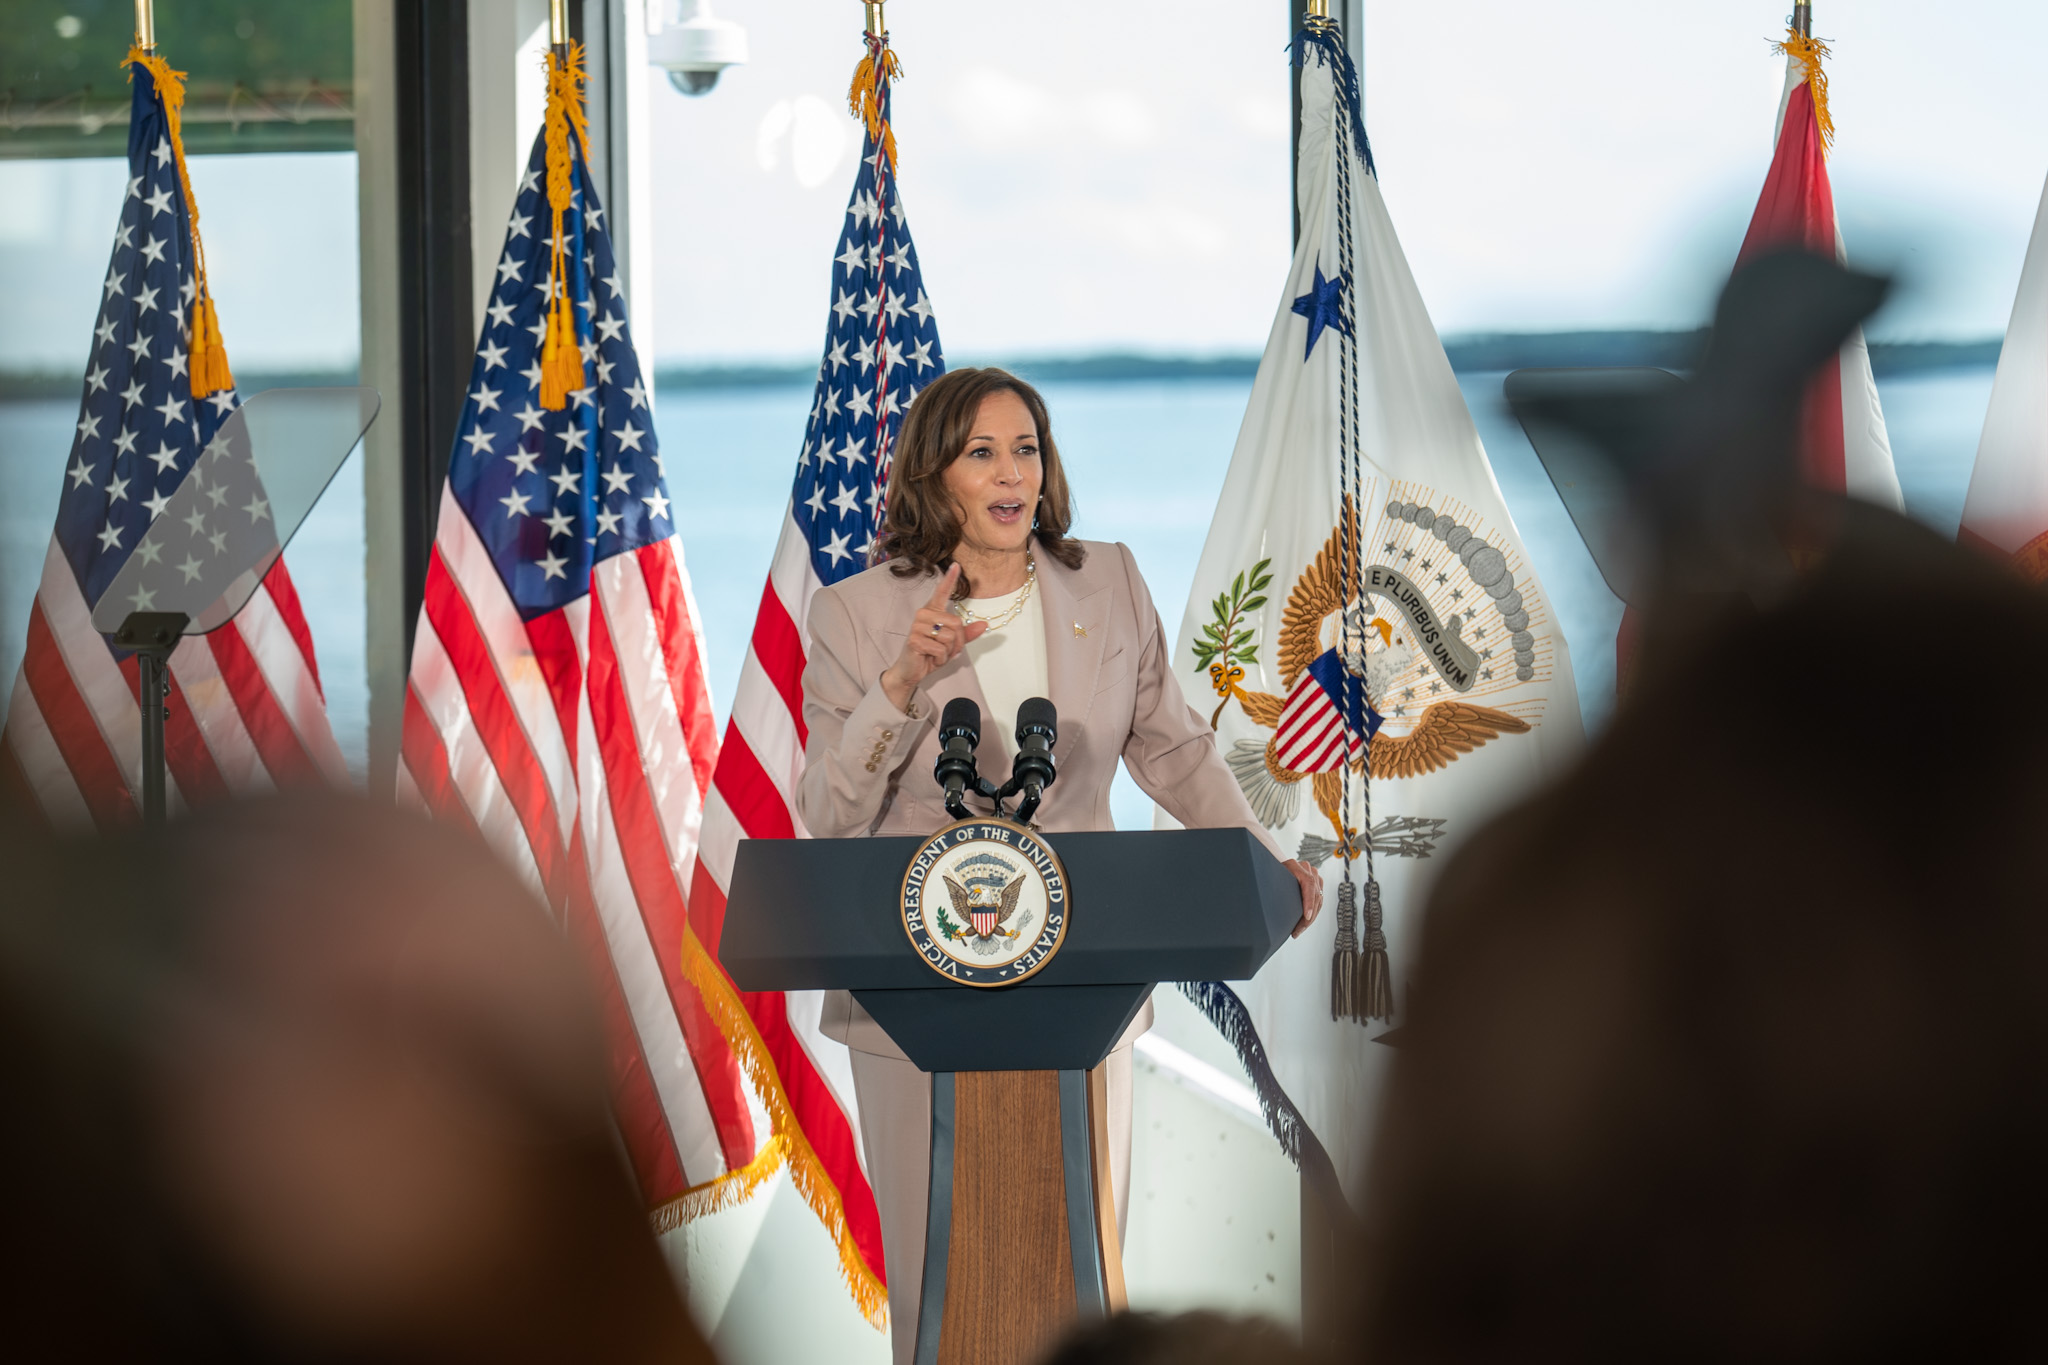 Vice President Kamala Harris on Twitter: "The climate crisis poses a rising  threat to coastal communities. Today, I visited Miami to announce $562  million to reduce the impact of storm surges, hurricanes,